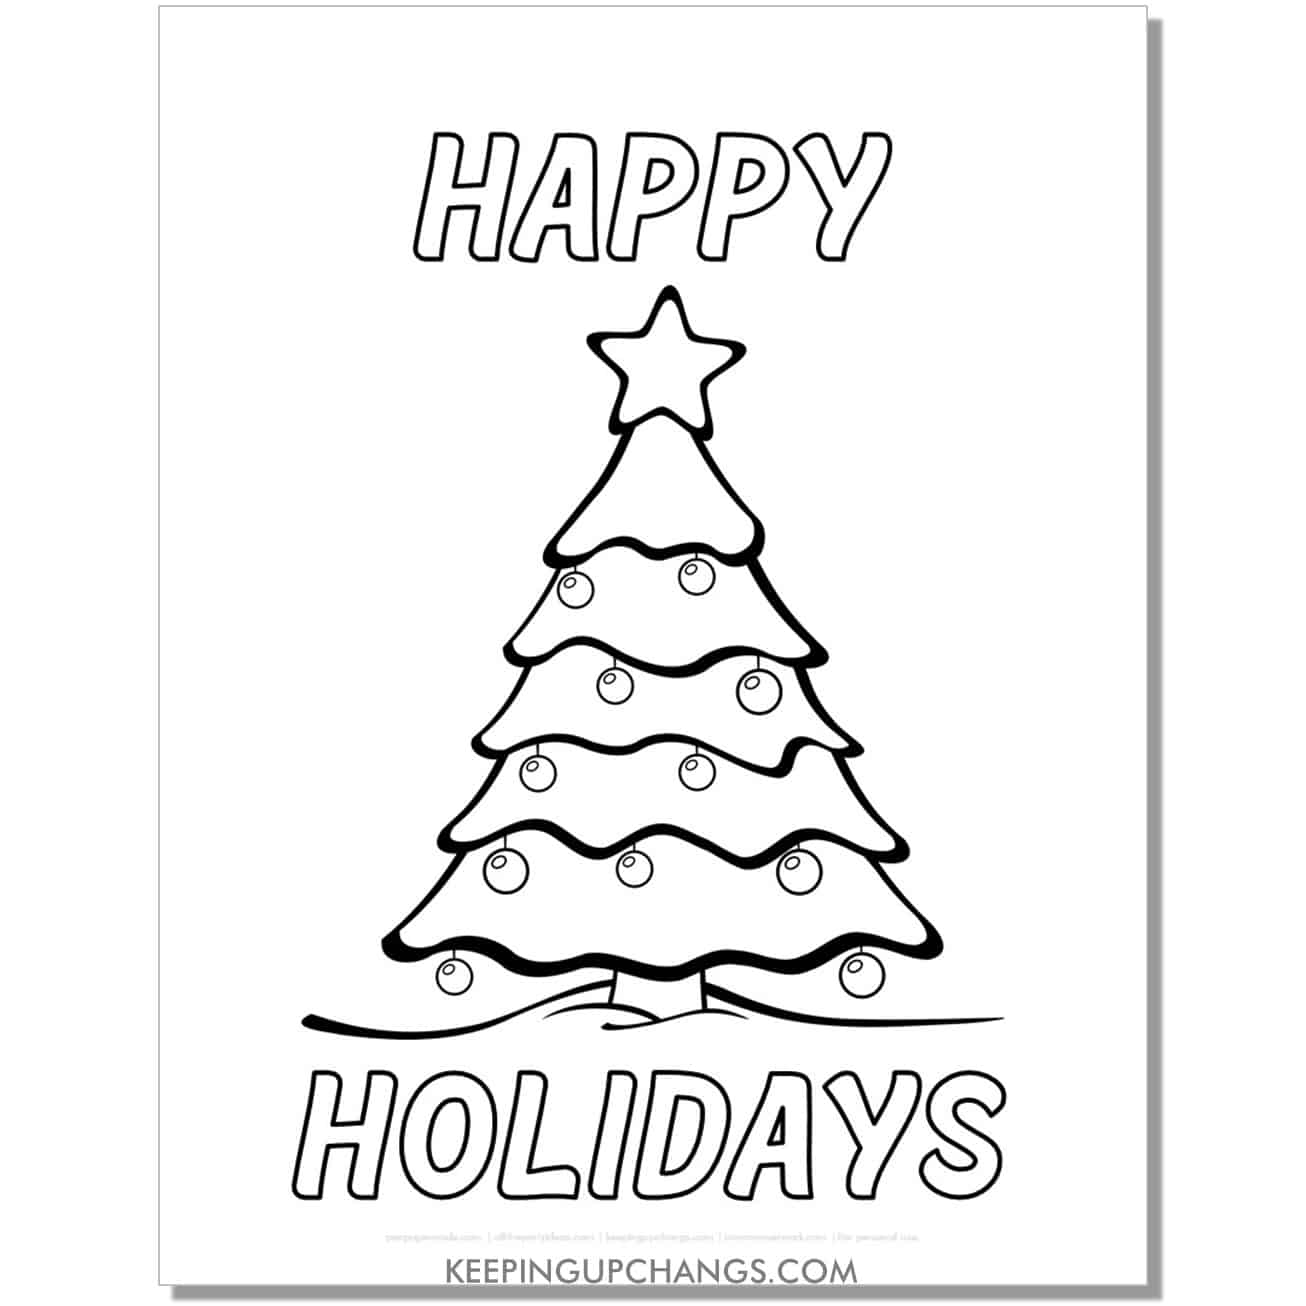 free easy, simple happy holidays christmas tree coloring page.